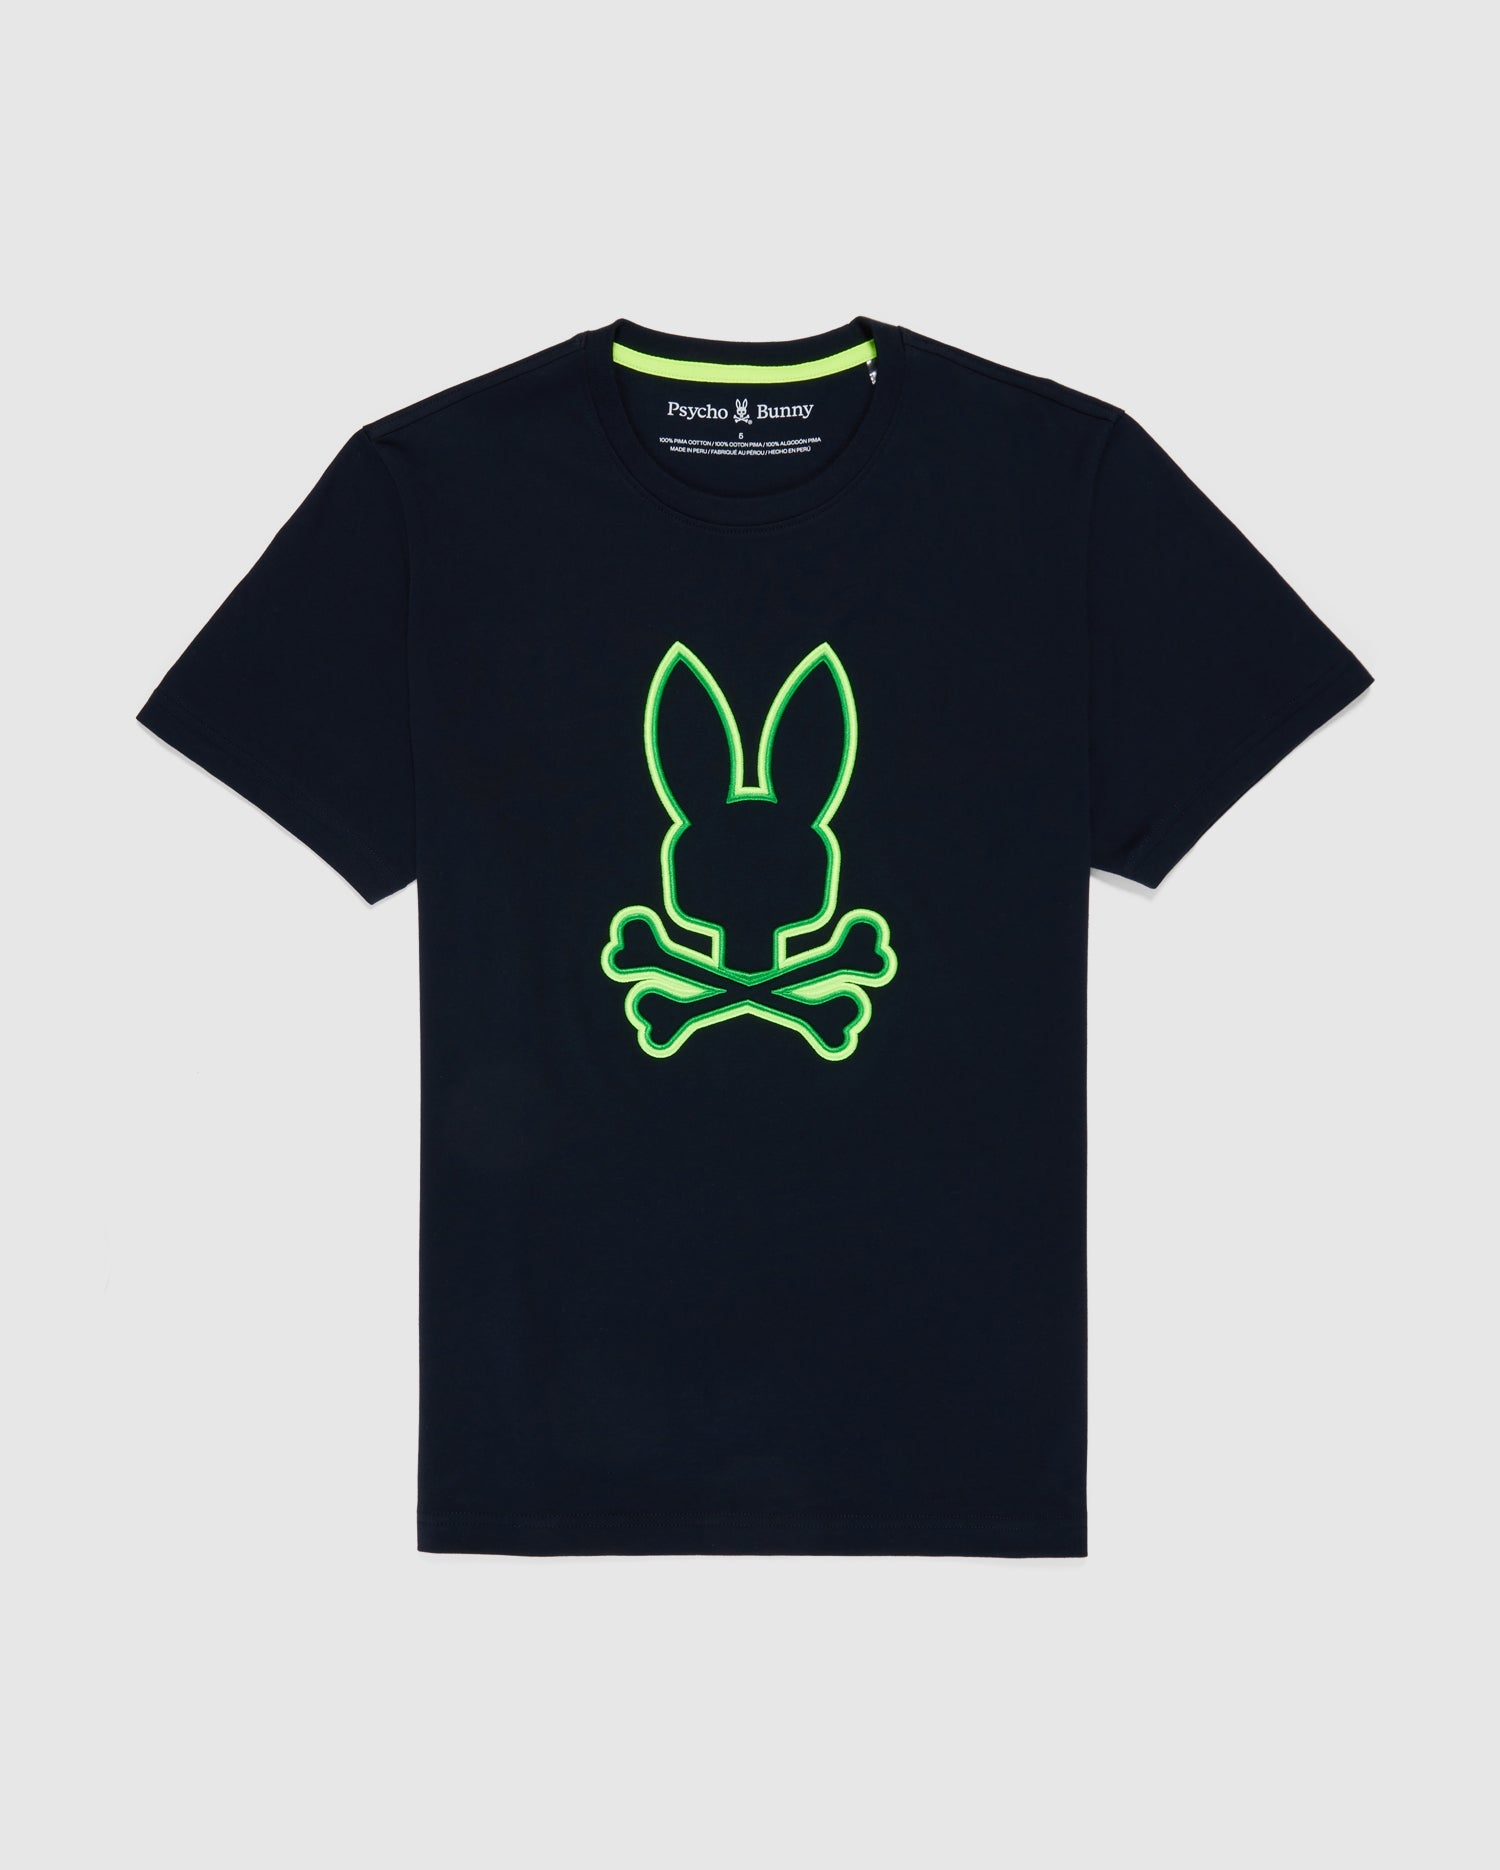 Sale  Clothing & Apparels for Men & Kids – Psycho Bunny Canada